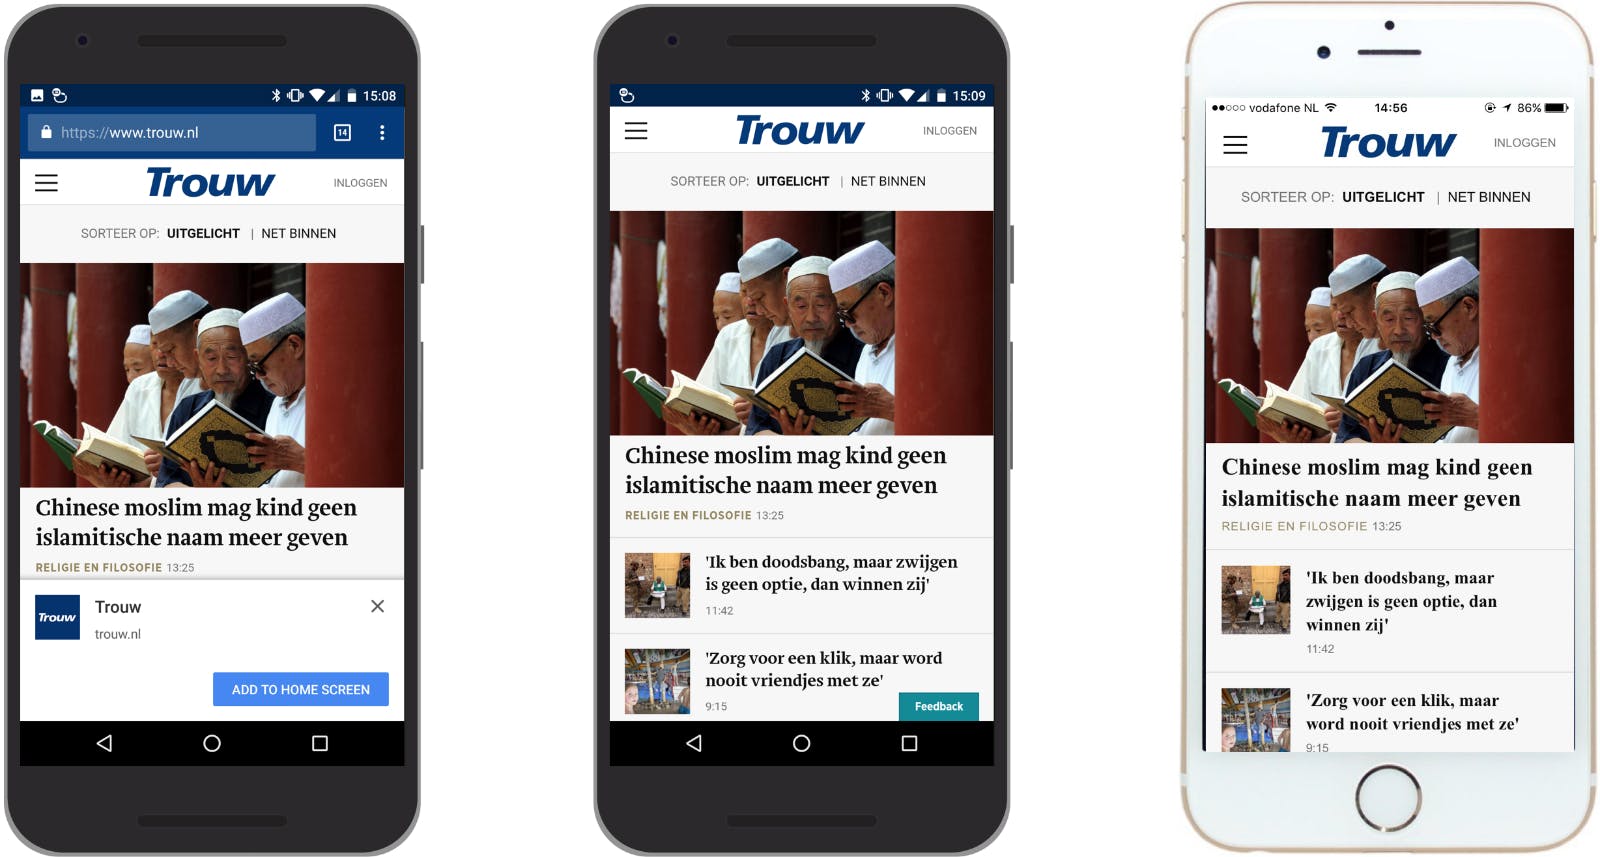 Trouw.nl as PWA in browser (left), as PWA published to Google Play Store (middle) and as PWA published to Apple's App Store (right).